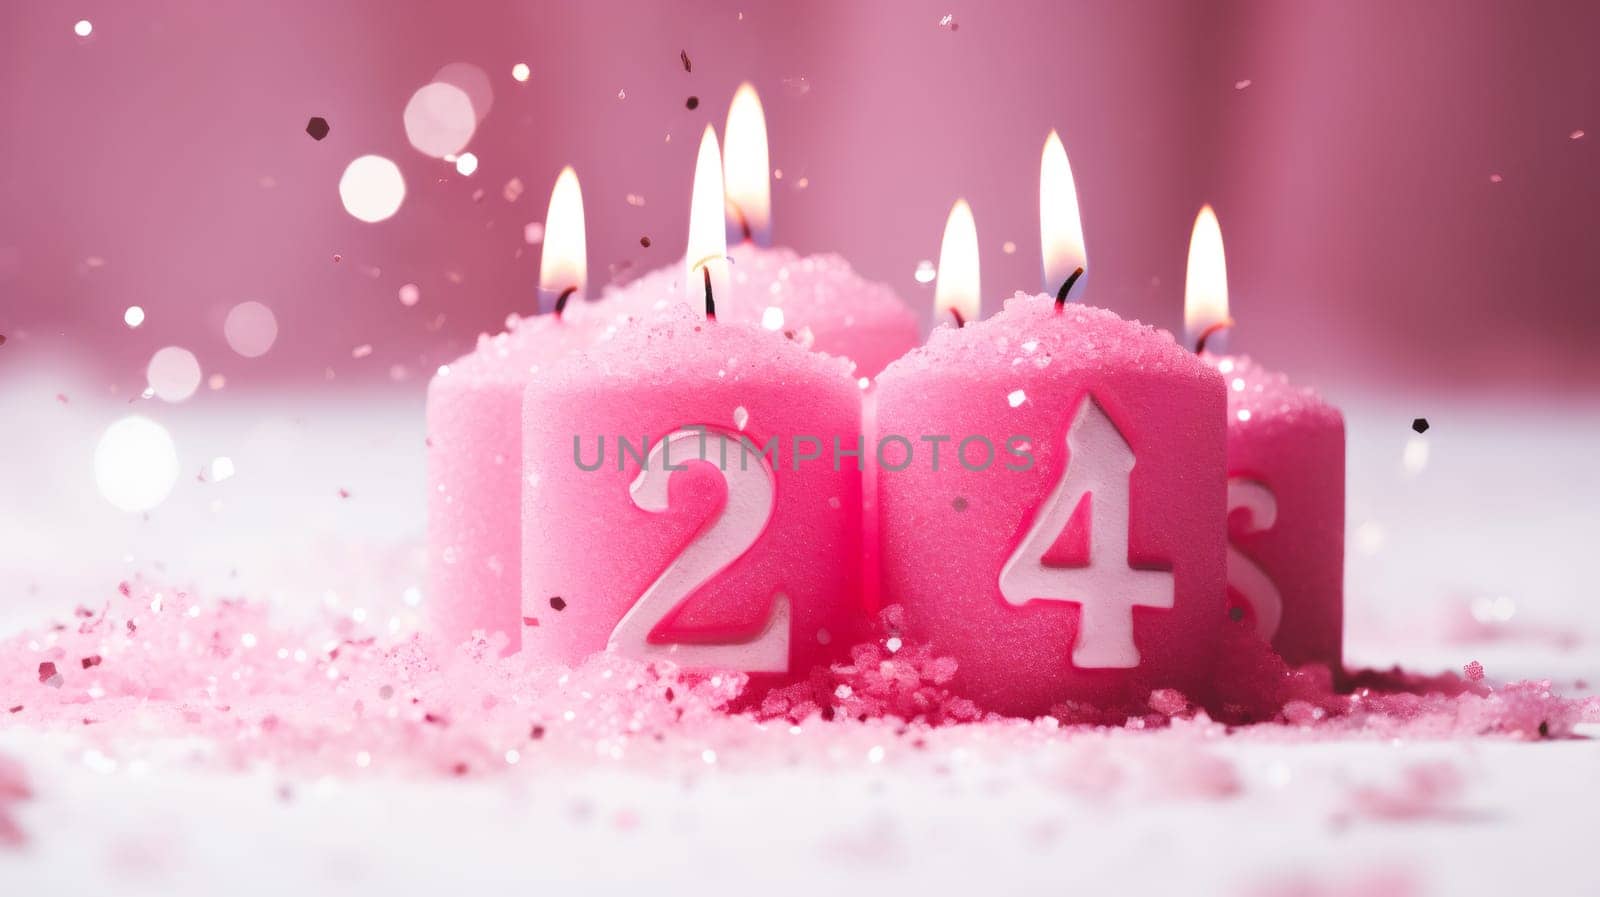 Five soft pink burning candles with white numbers 24 stand in the snow against a background of blurry bokeh and falling confetti, close-up side view.